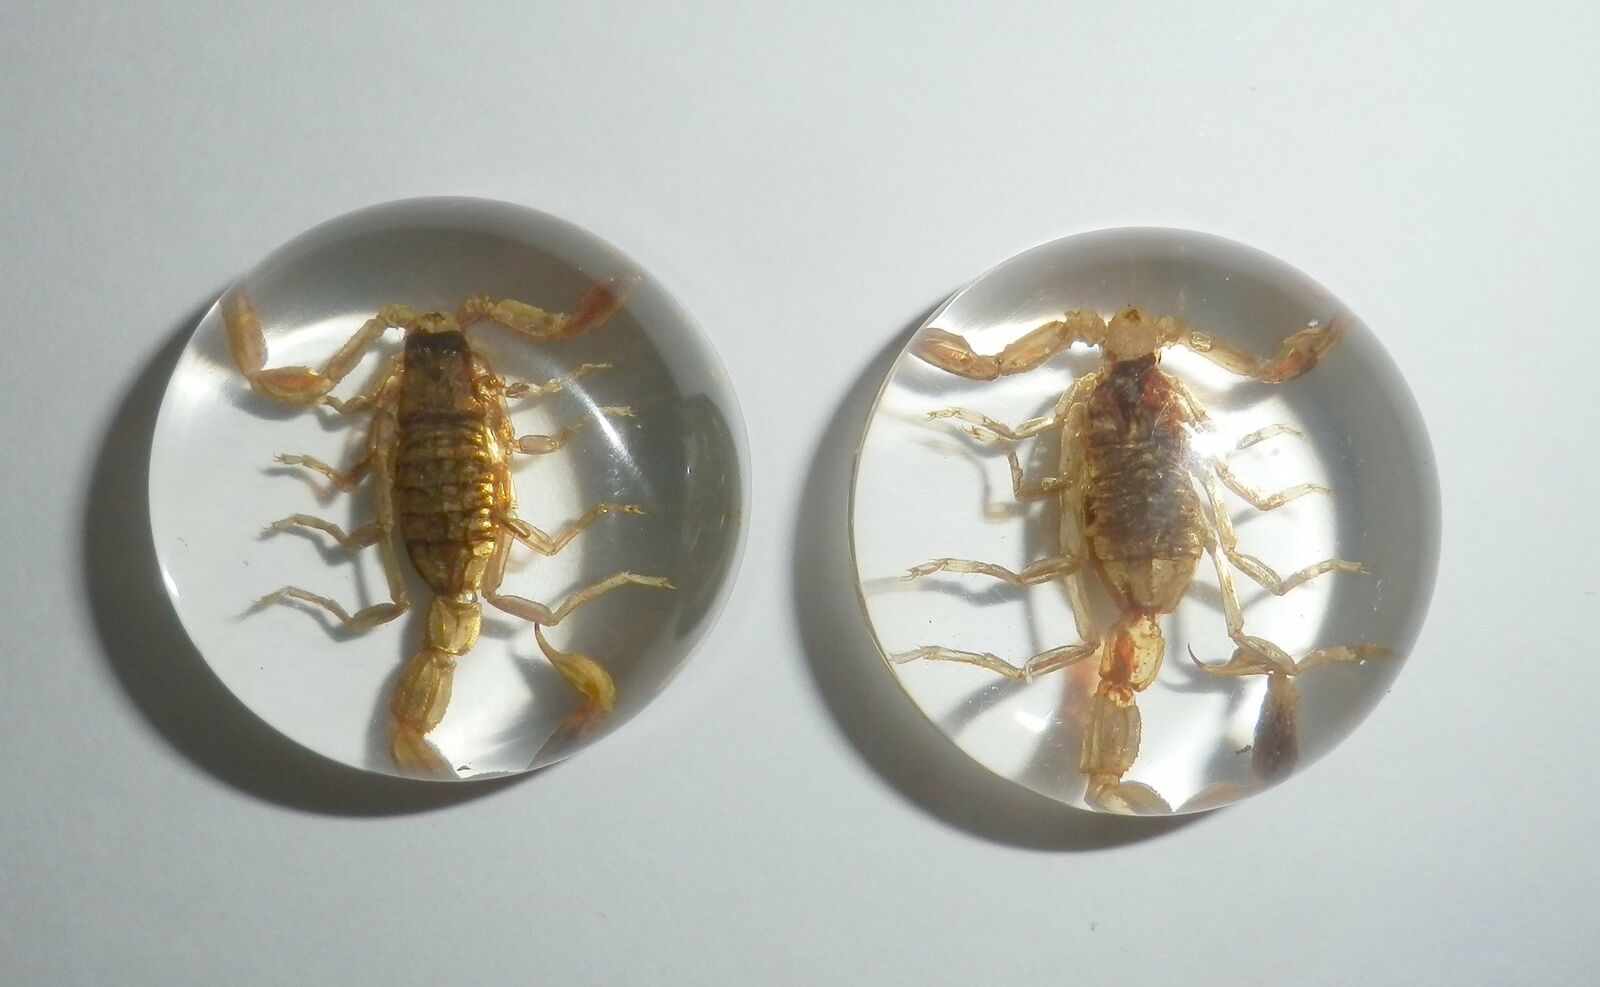 Insect Cabochon Golden Scorpion Specimen Round 25 Mm Clear 2 Pieces Lot